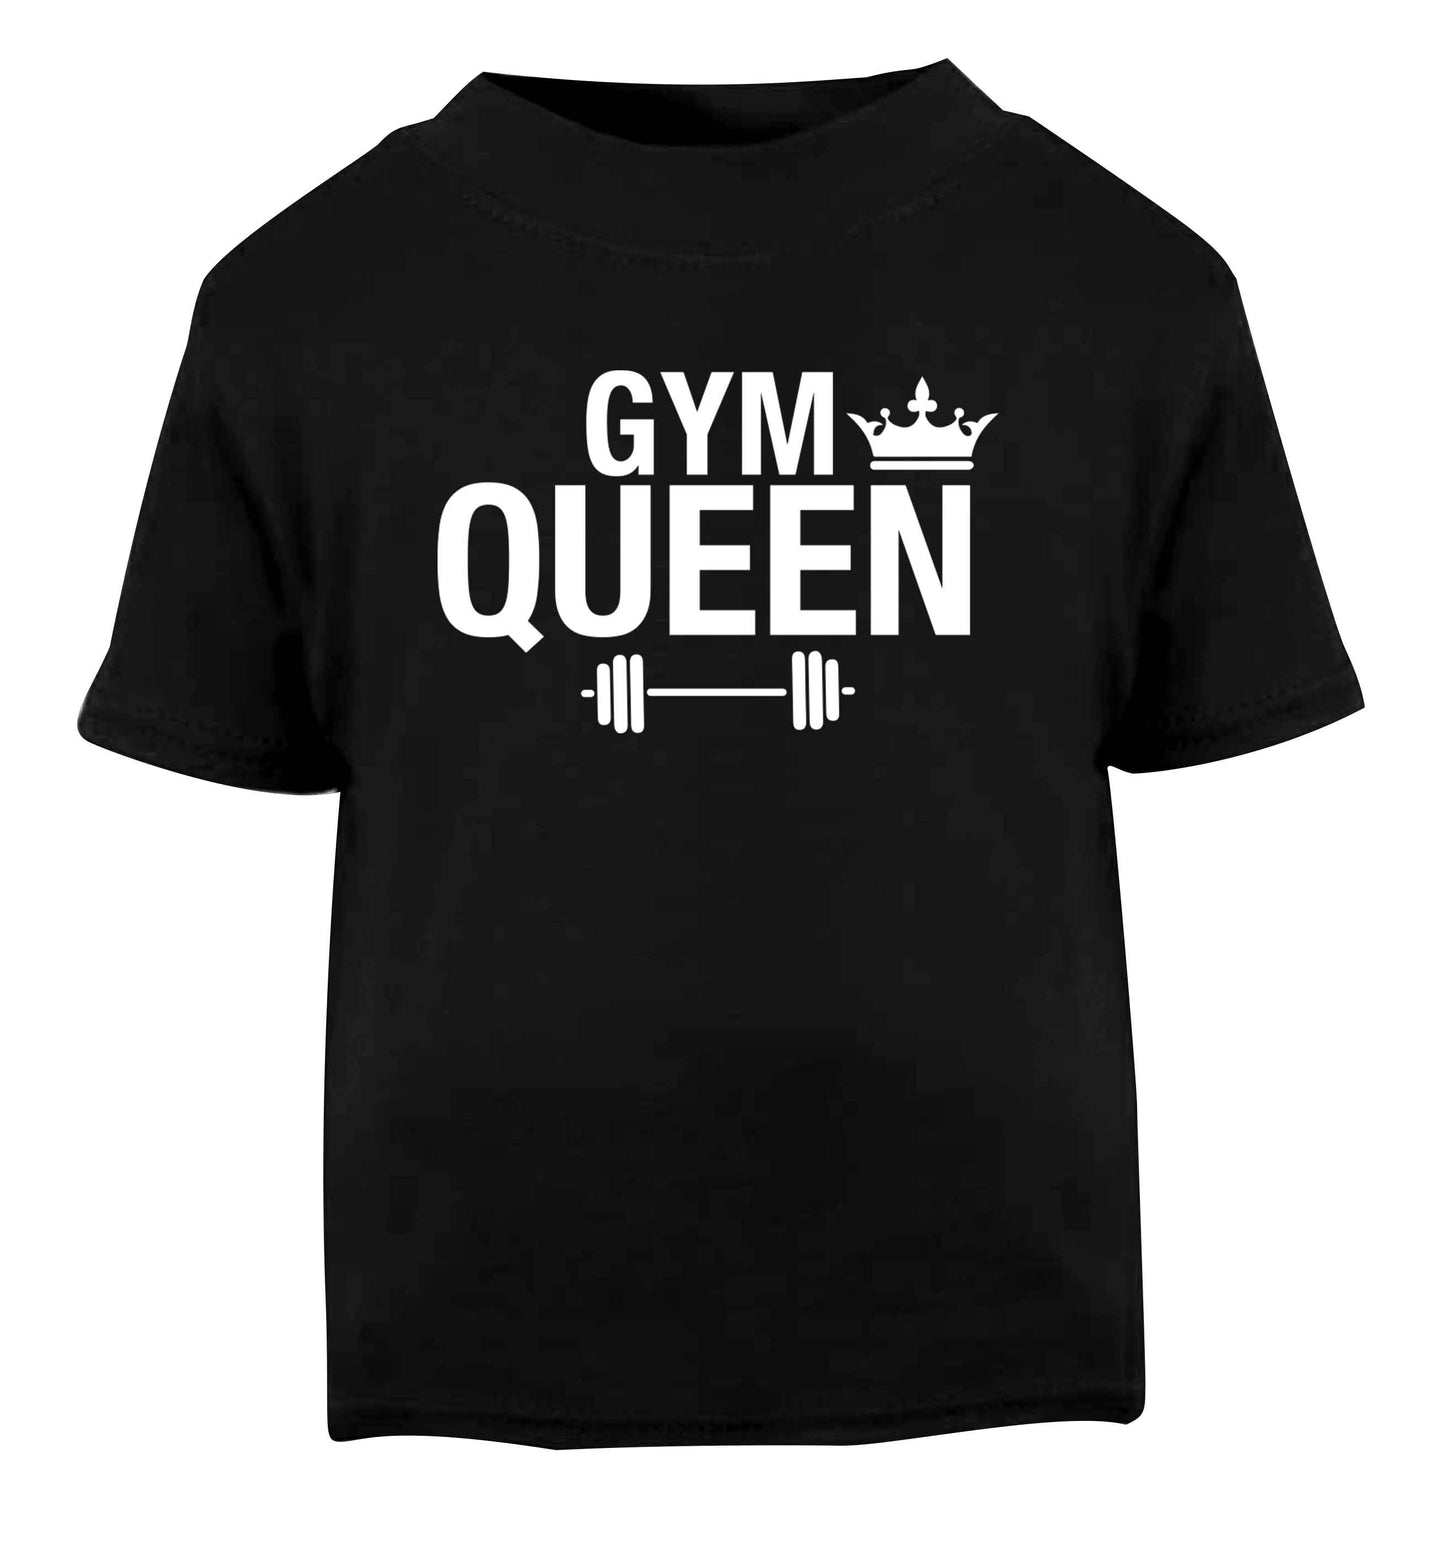 Gym queen Black Baby Toddler Tshirt 2 years